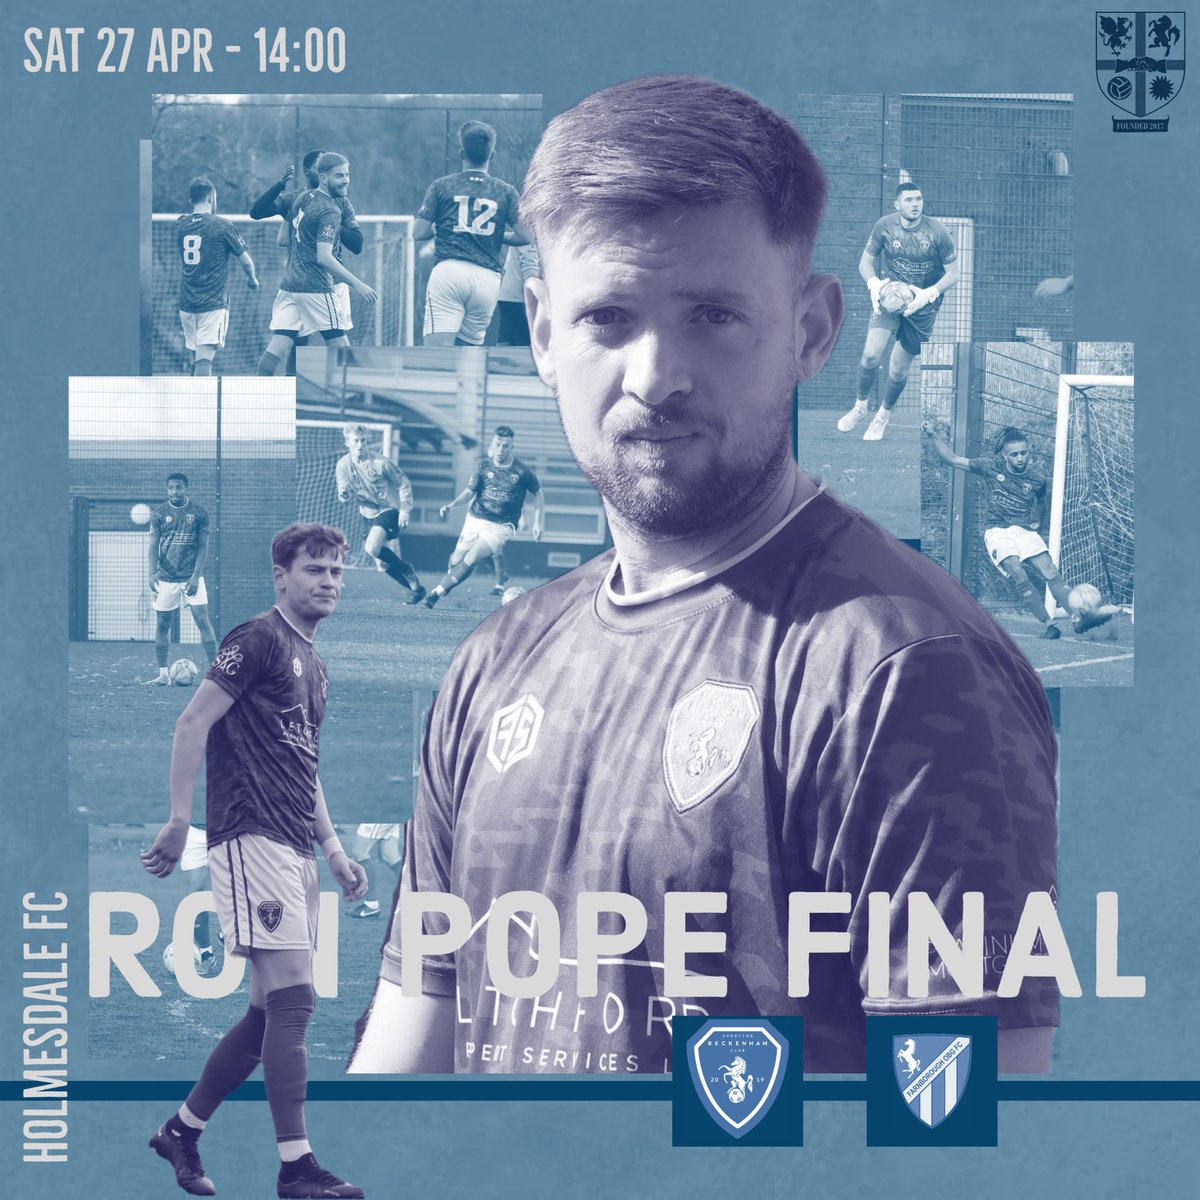 THIS SATURDAY‼️⚽️ RON POPE CUP FINAL🏆 📍@HolmesdaleFC ⏰ 14:00 All support appreciated - please retweet @BASLFL @SELKGrassroots @KCFL1516